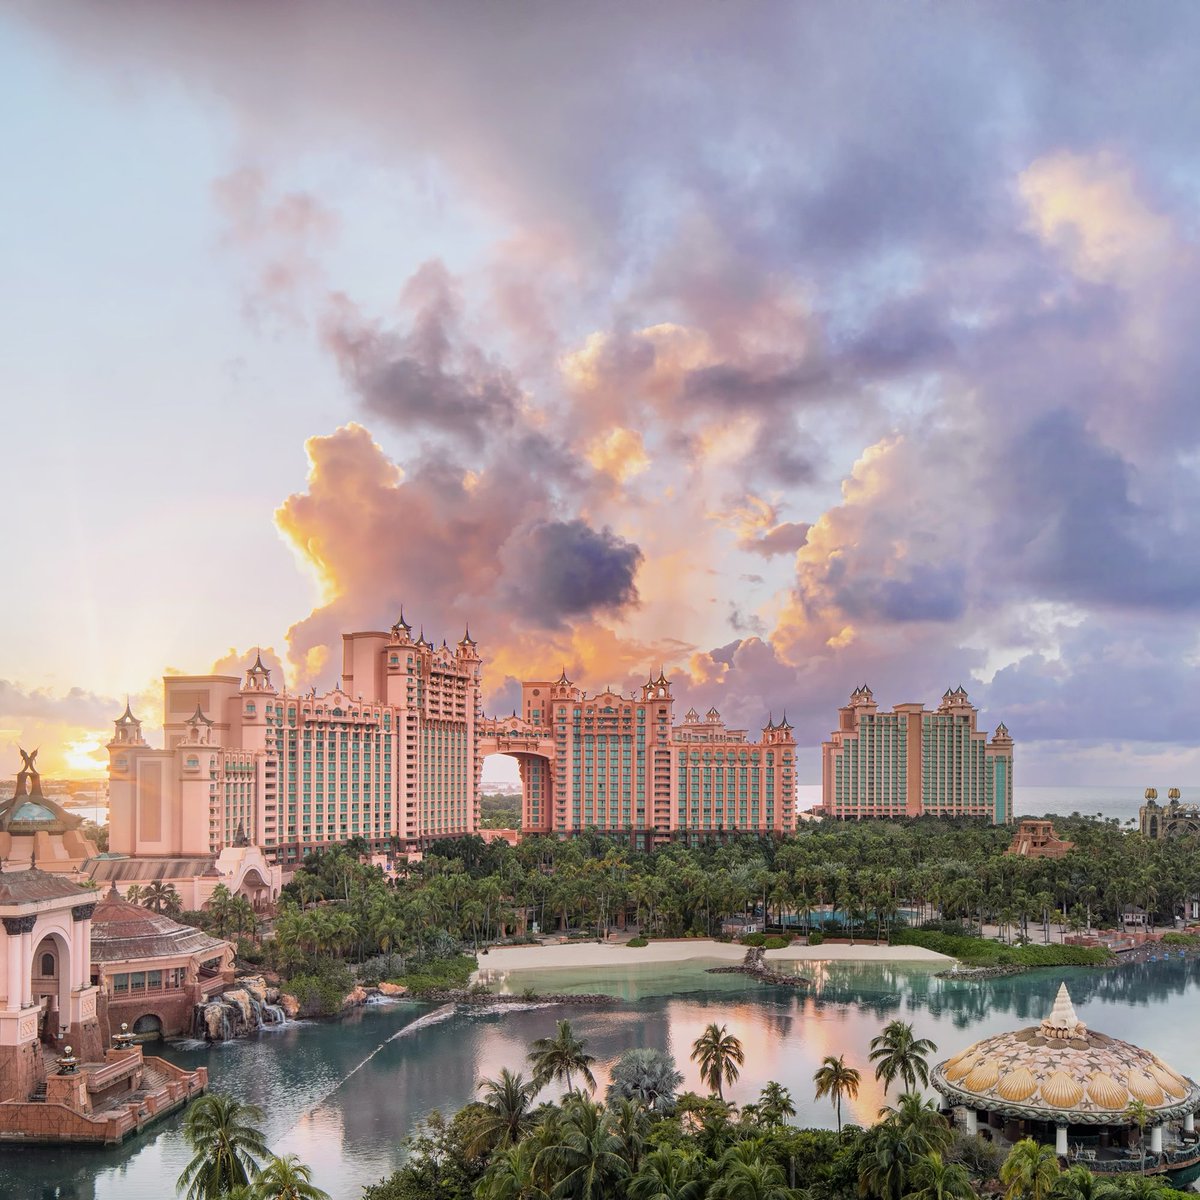 Excited to kick off New Year’s Eve celebrations at @atlantisbahamas tonight! Looking forward to a great concert in Paradise on Casuarina Beach. 🏖️🎇   #AtlantisLIVE #AtlantisBahamas